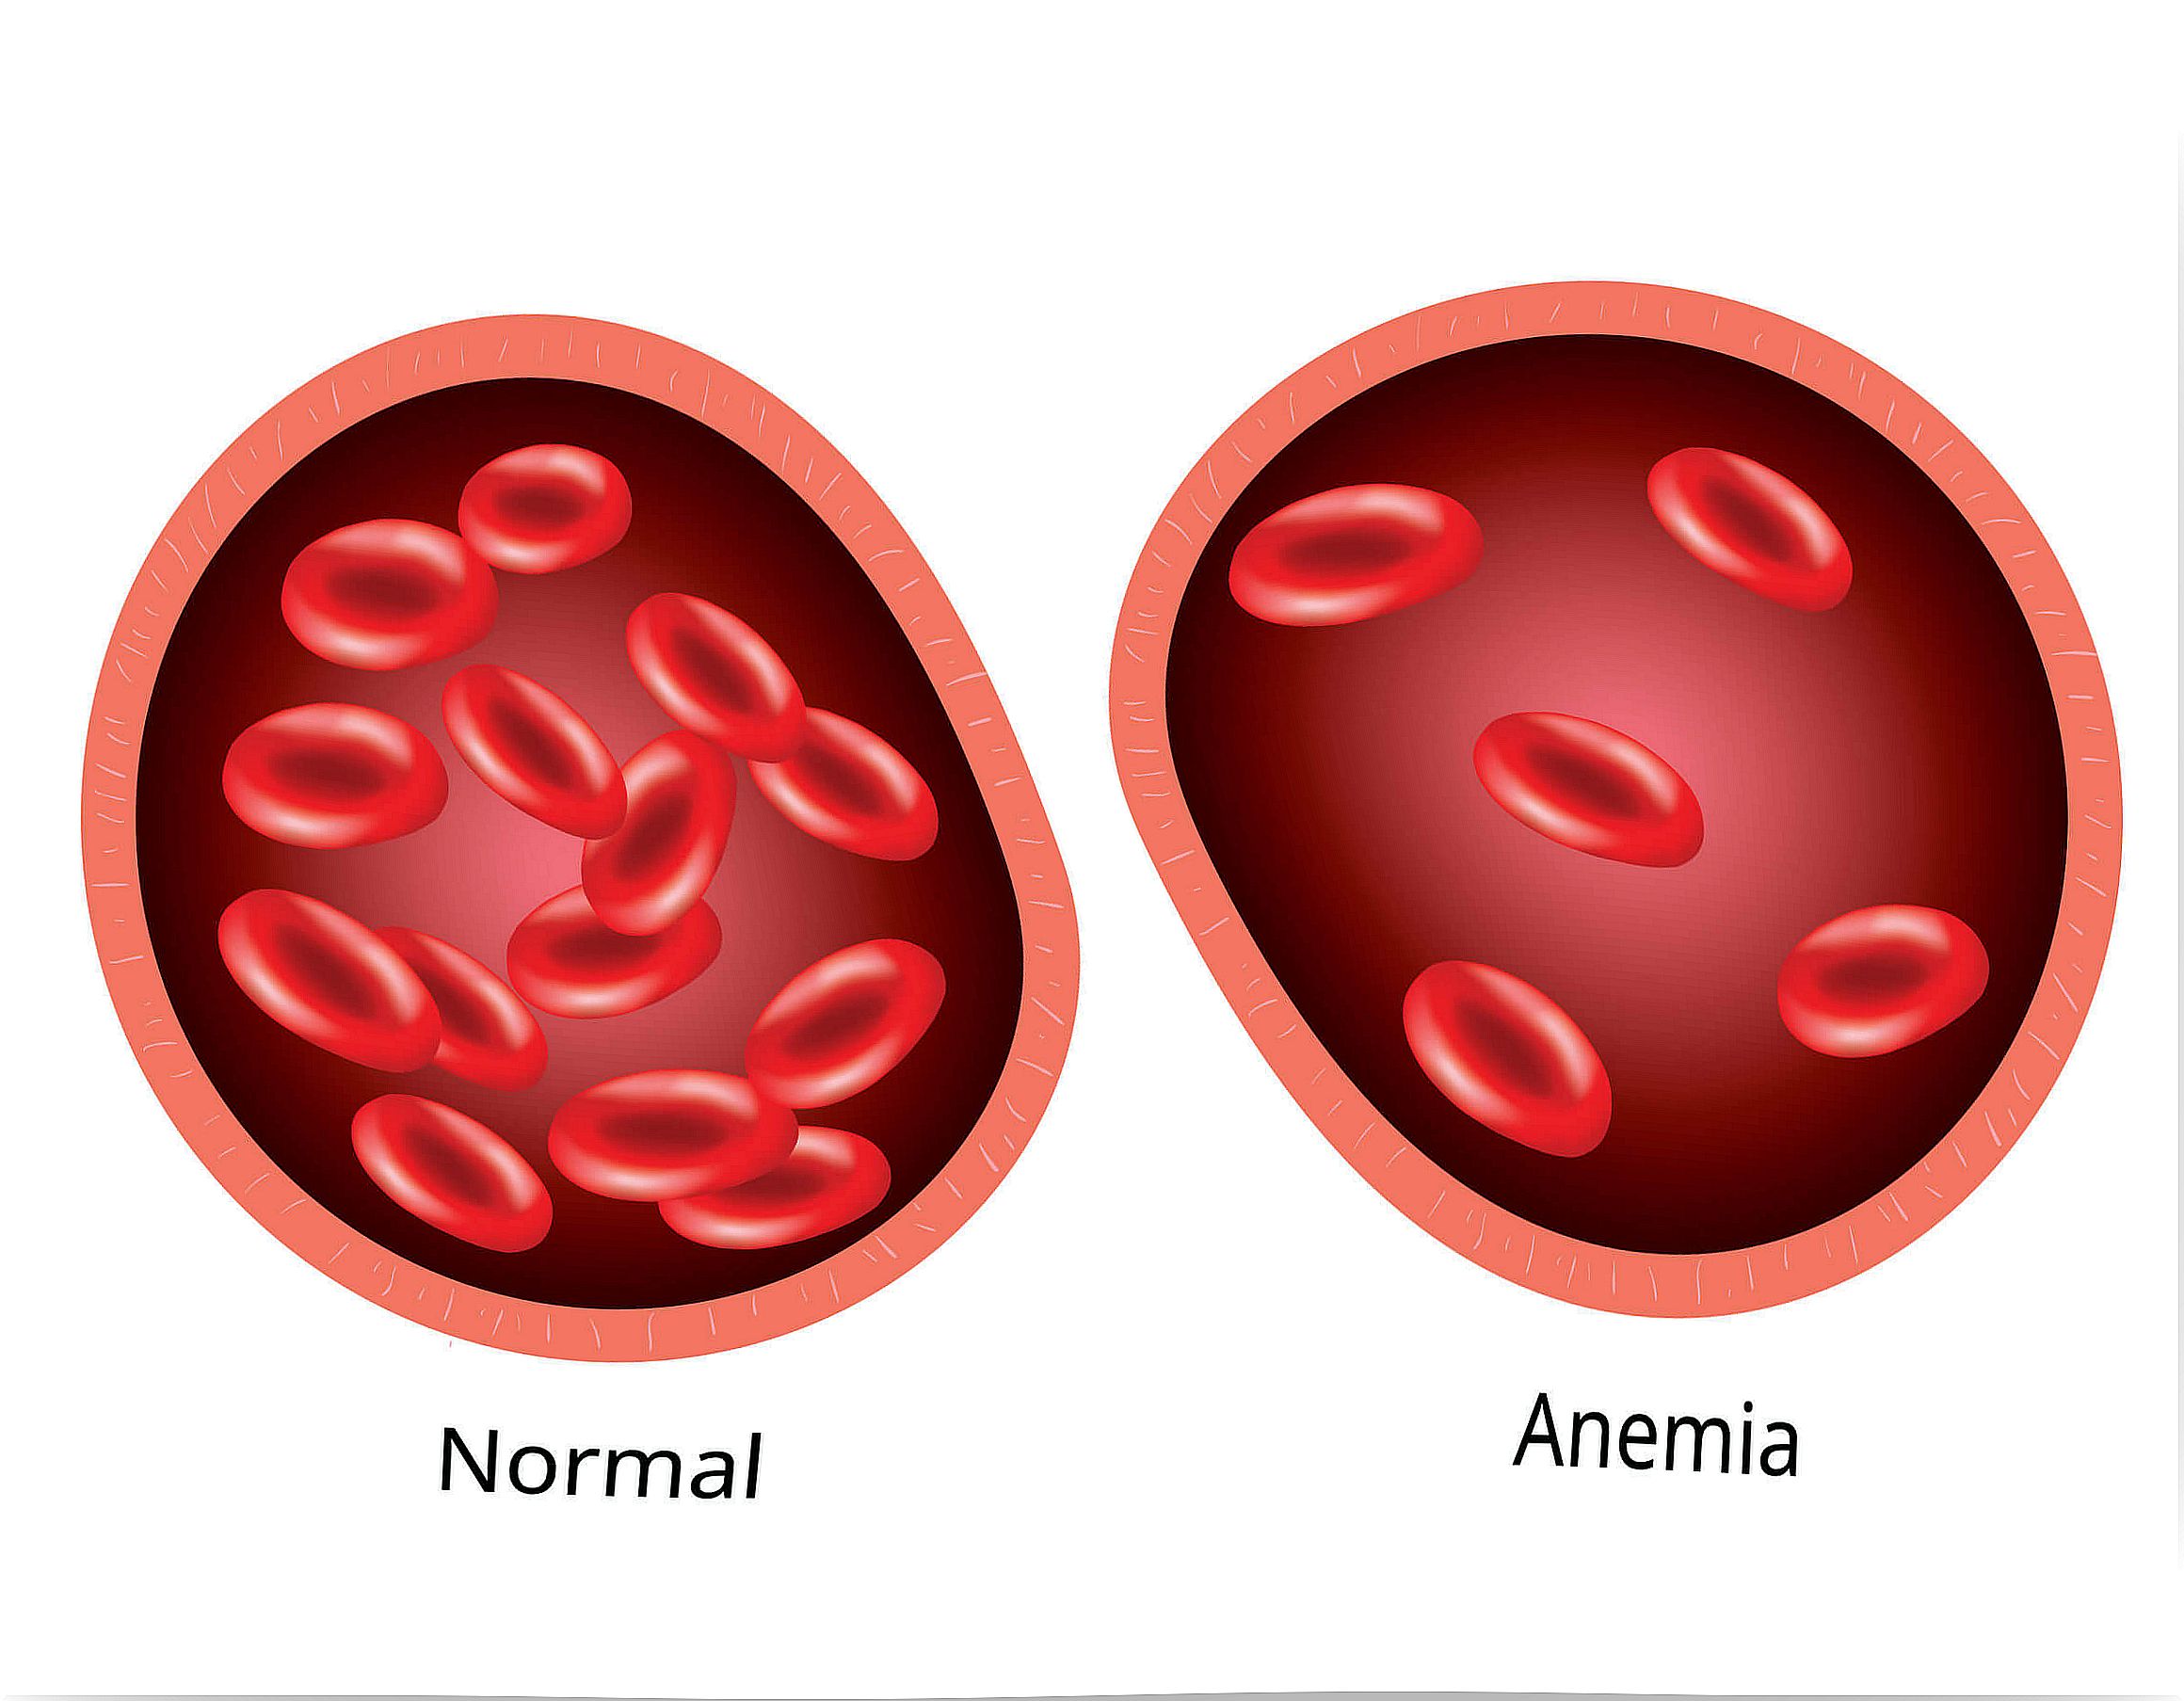 Anemia in children is due to problems with red blood cells.